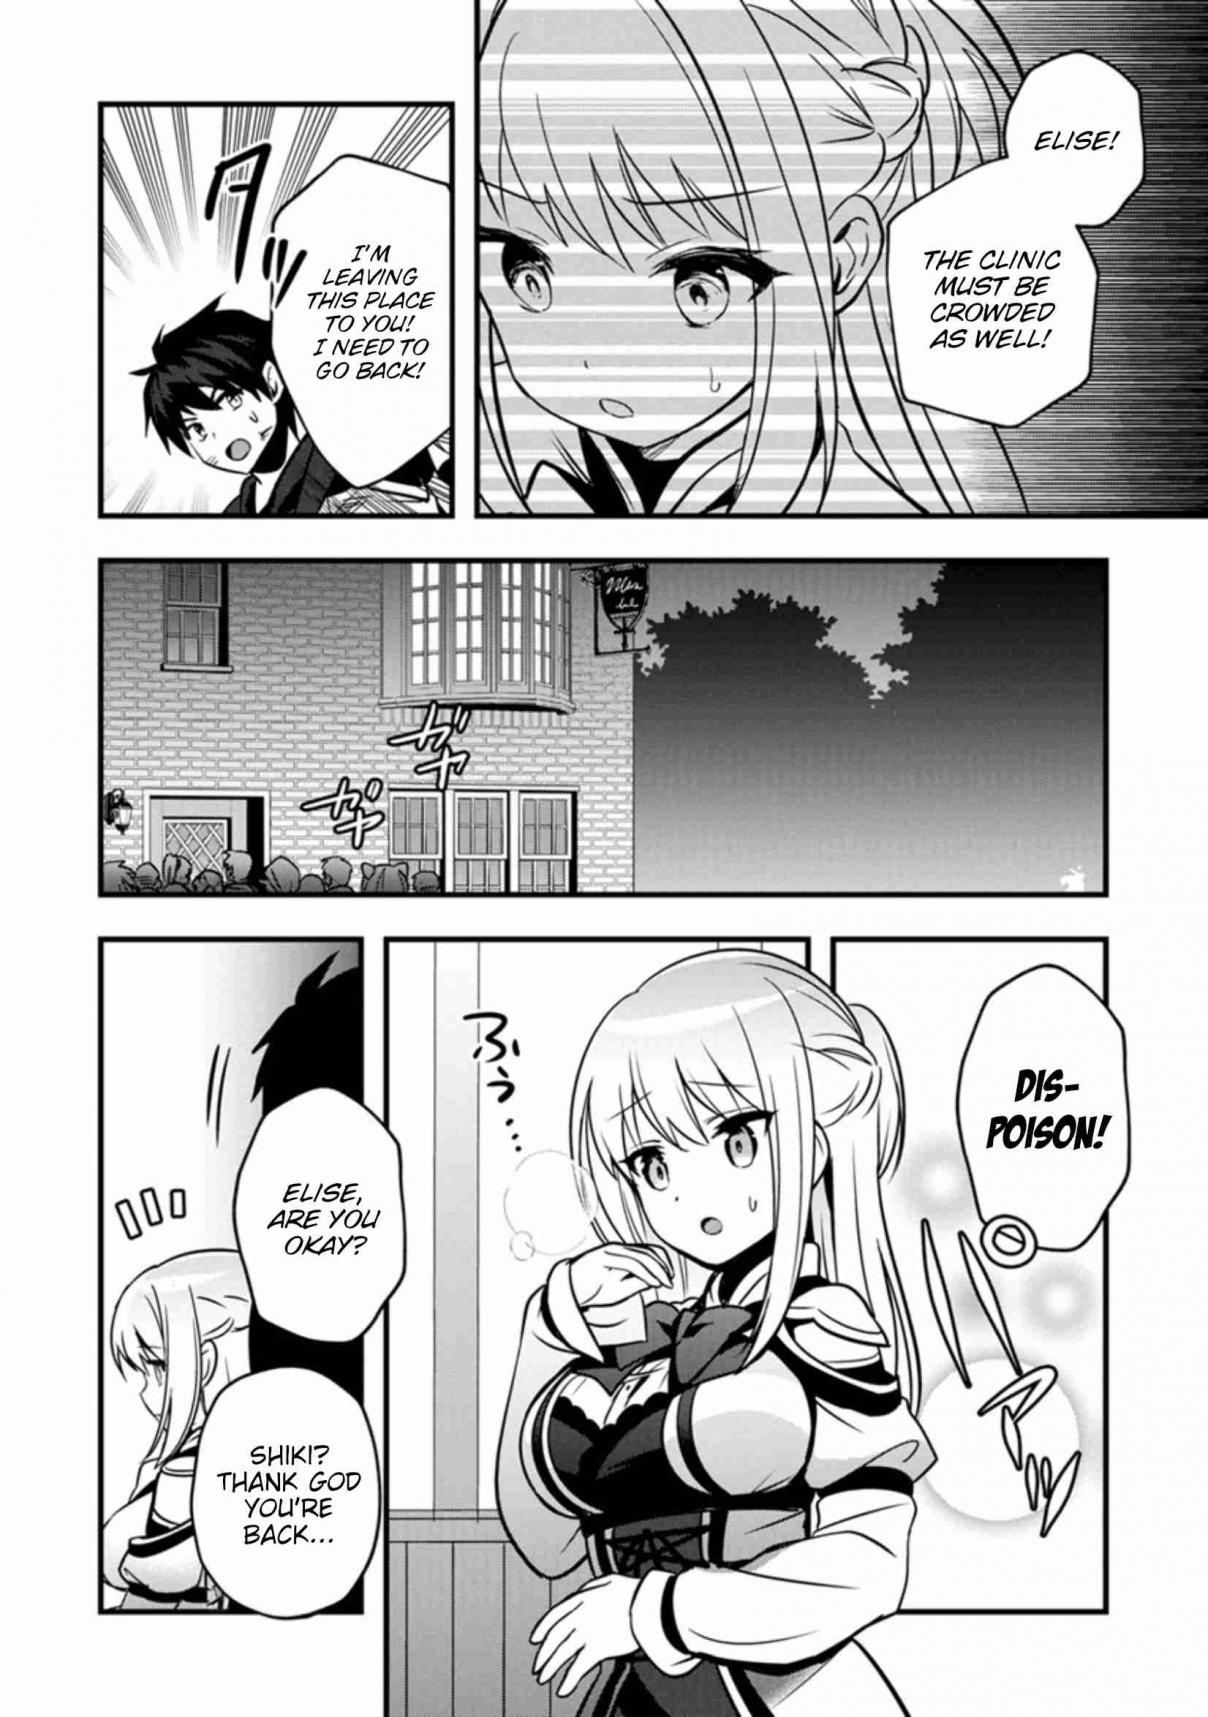 I Work As A Healer In Another World's Labyrinth City Vol. 2 Ch. 10